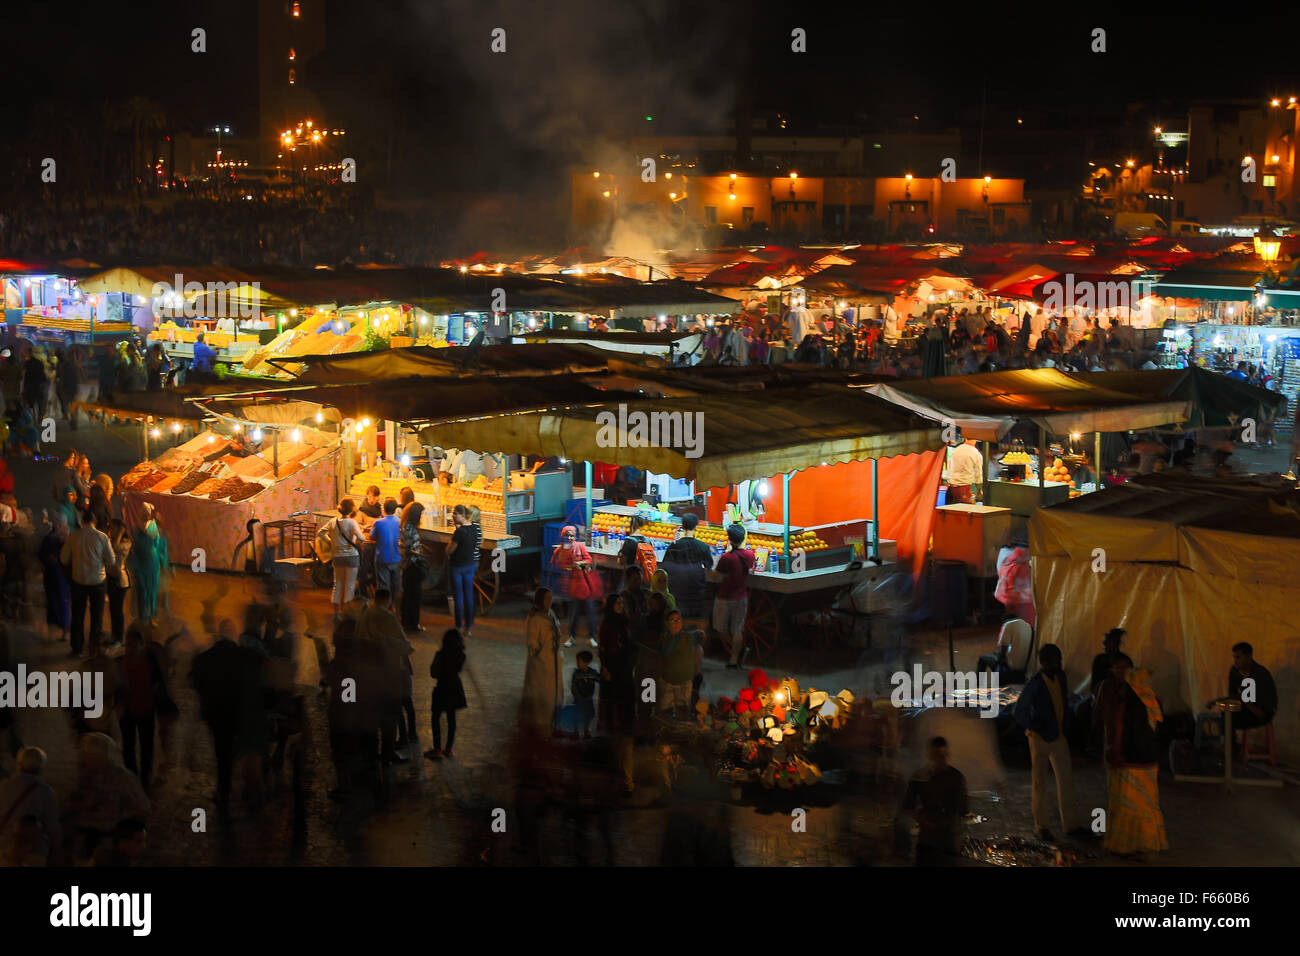 The typical atmosphere of the famous Marrakesh square with lots of food, traditional music, aromas of spices and traditional cra Stock Photo